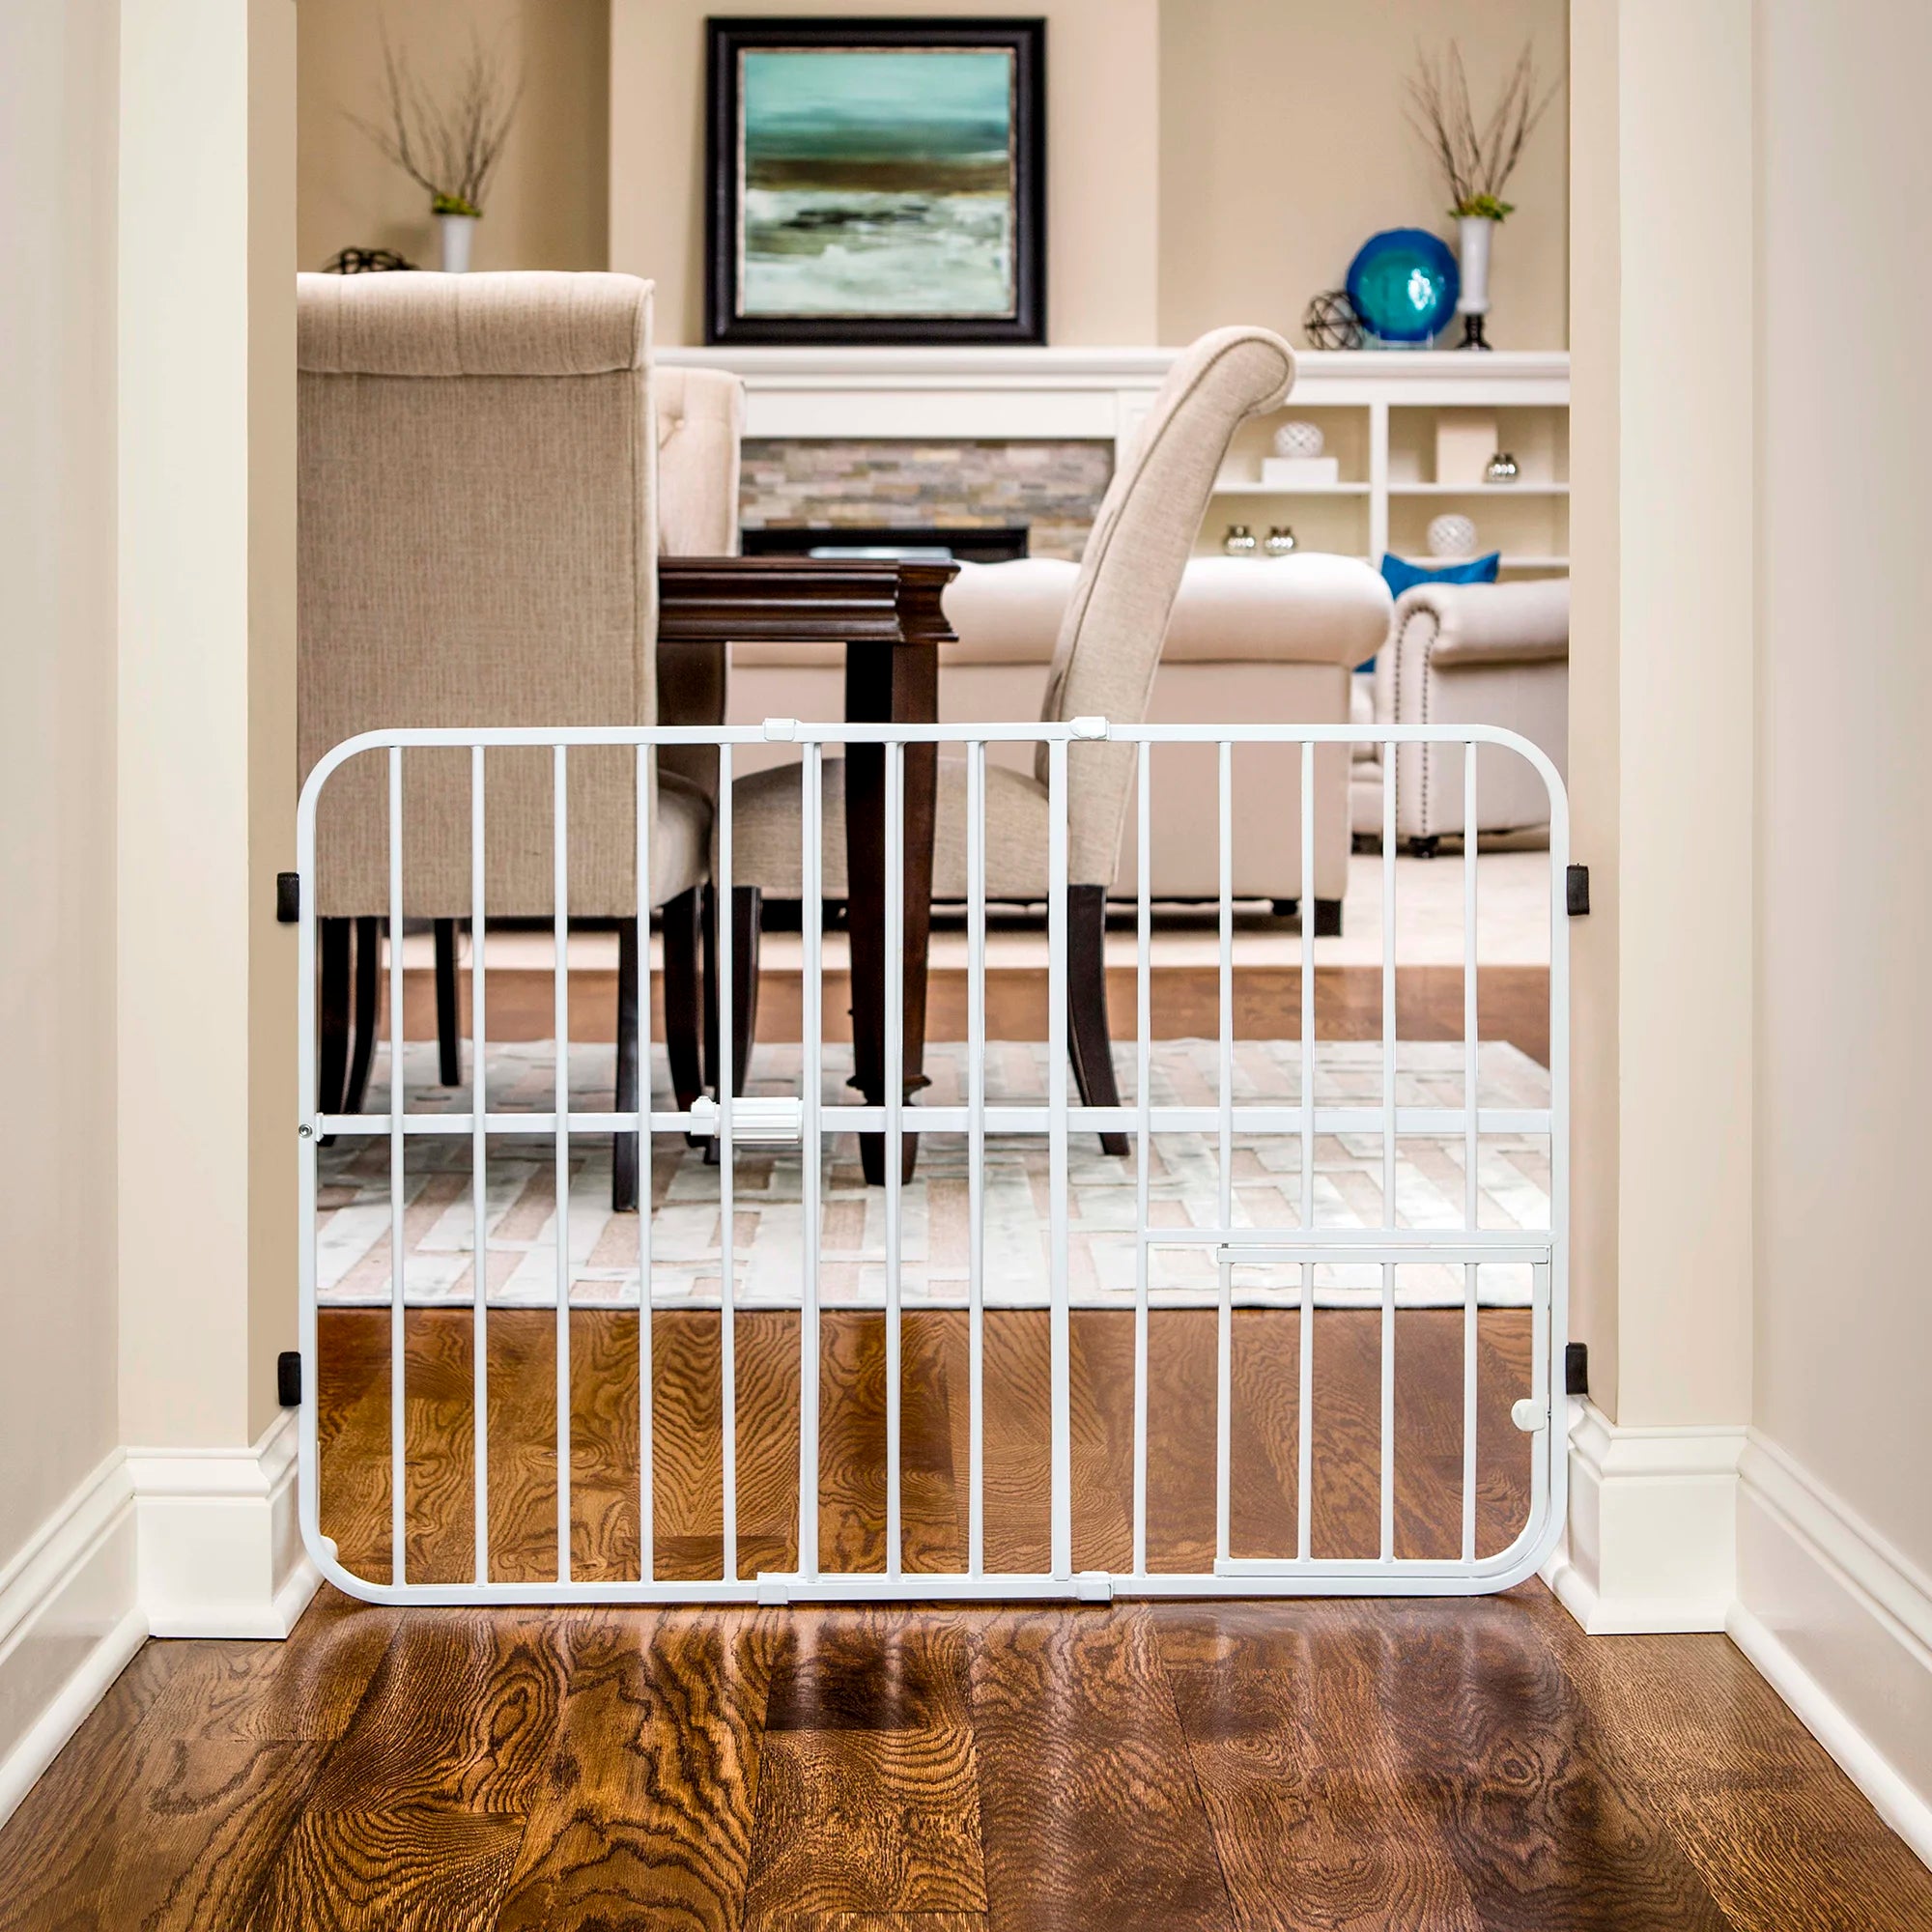 Tuffy® Pet Gate set up in a dining room and living room.